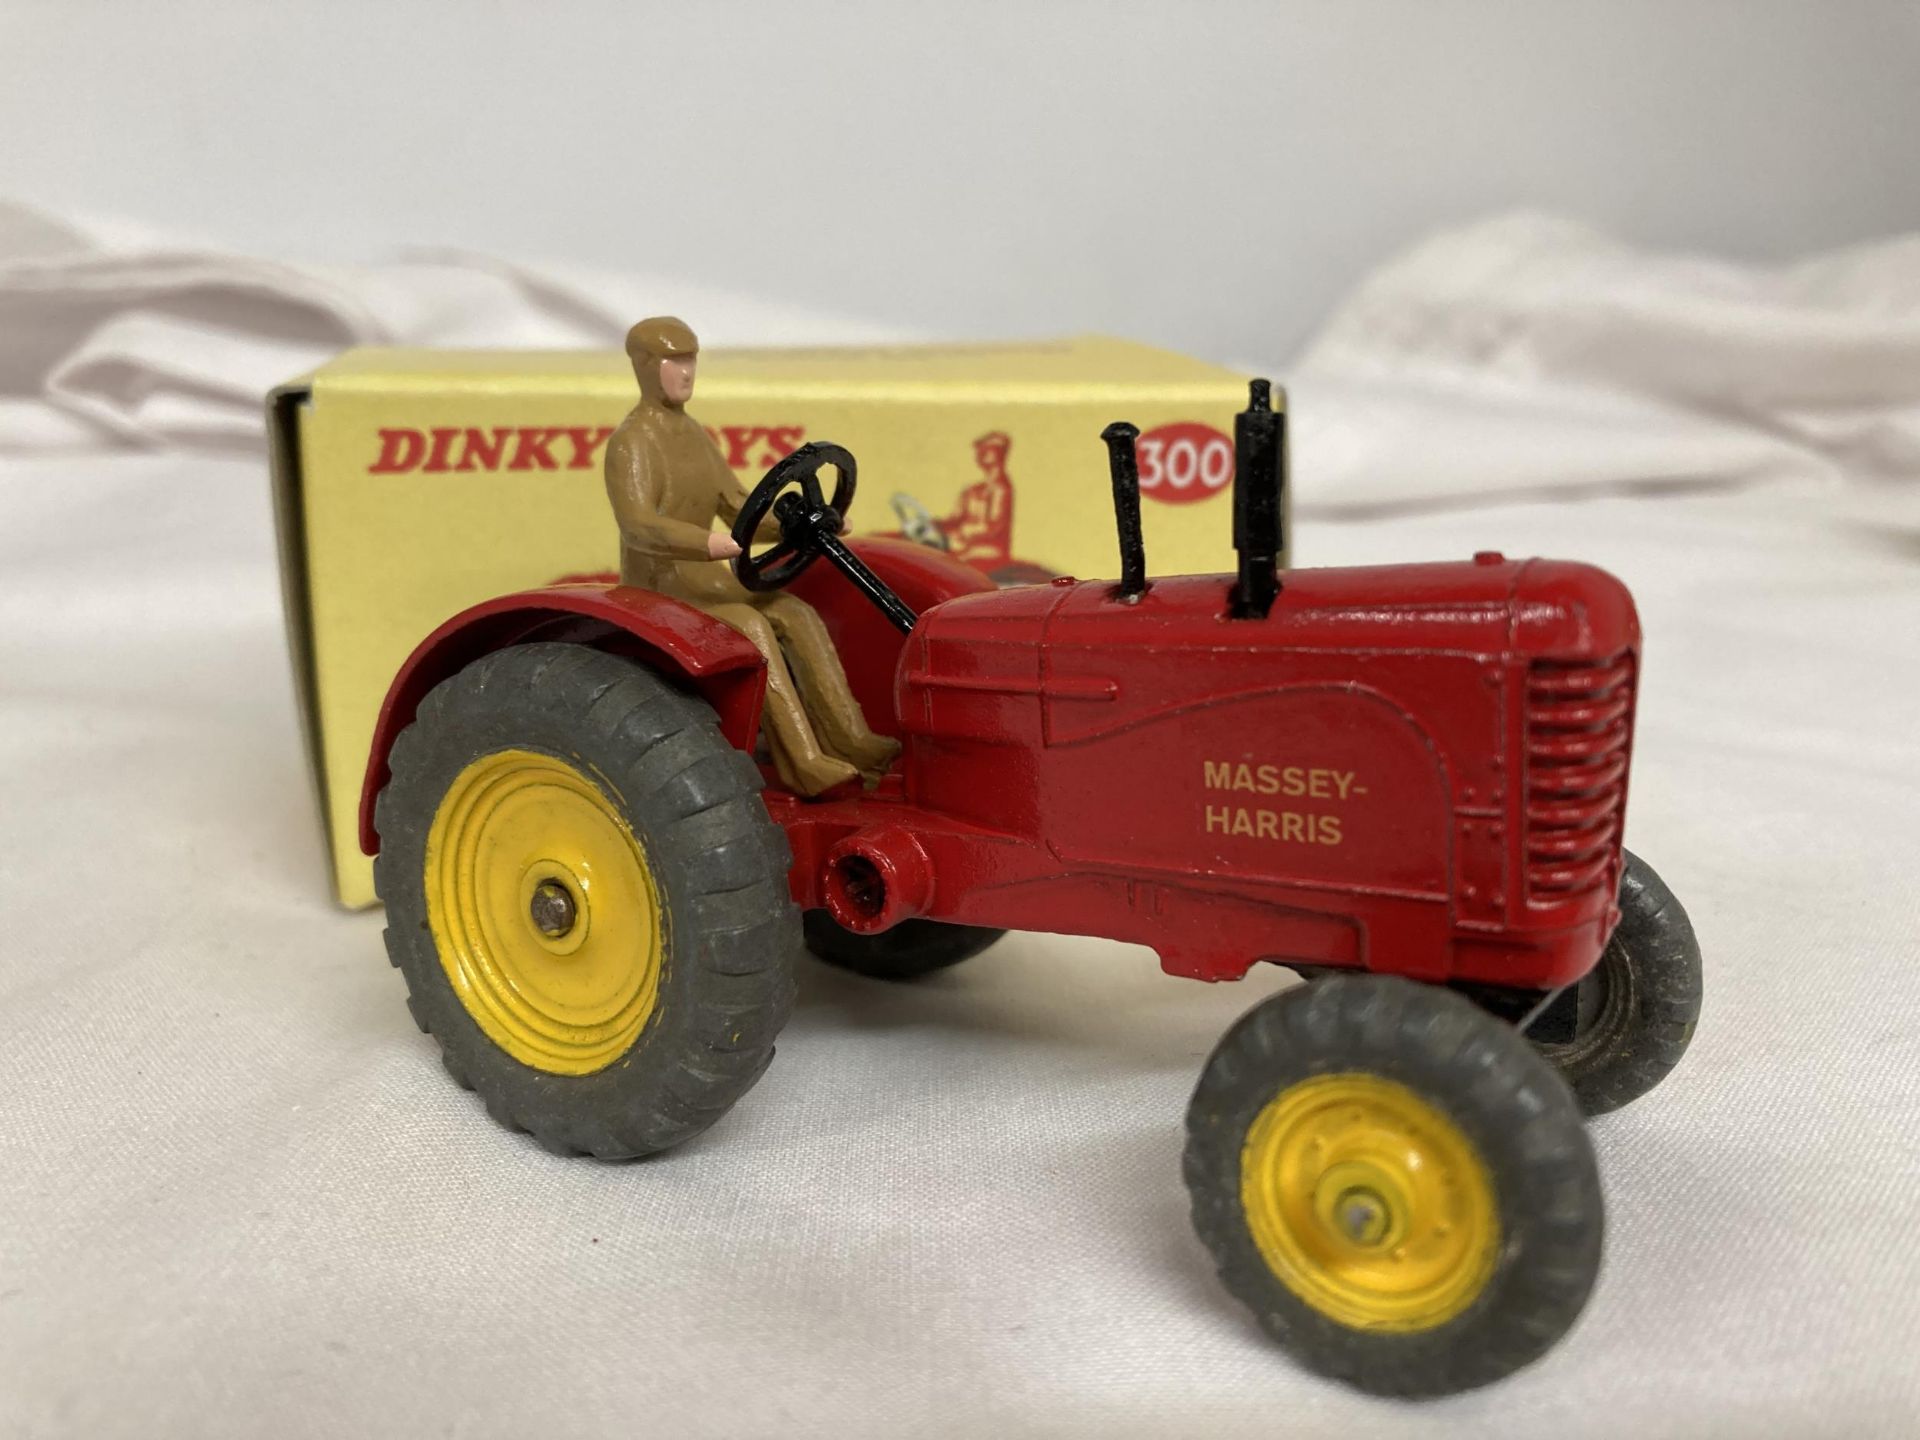 TWO BOXED DINKY MODELS NO. 300 - A MASSEY HARRIS TRACTOR AND NO. 321 - A MASSEY HARRIS MANURE - Image 2 of 3